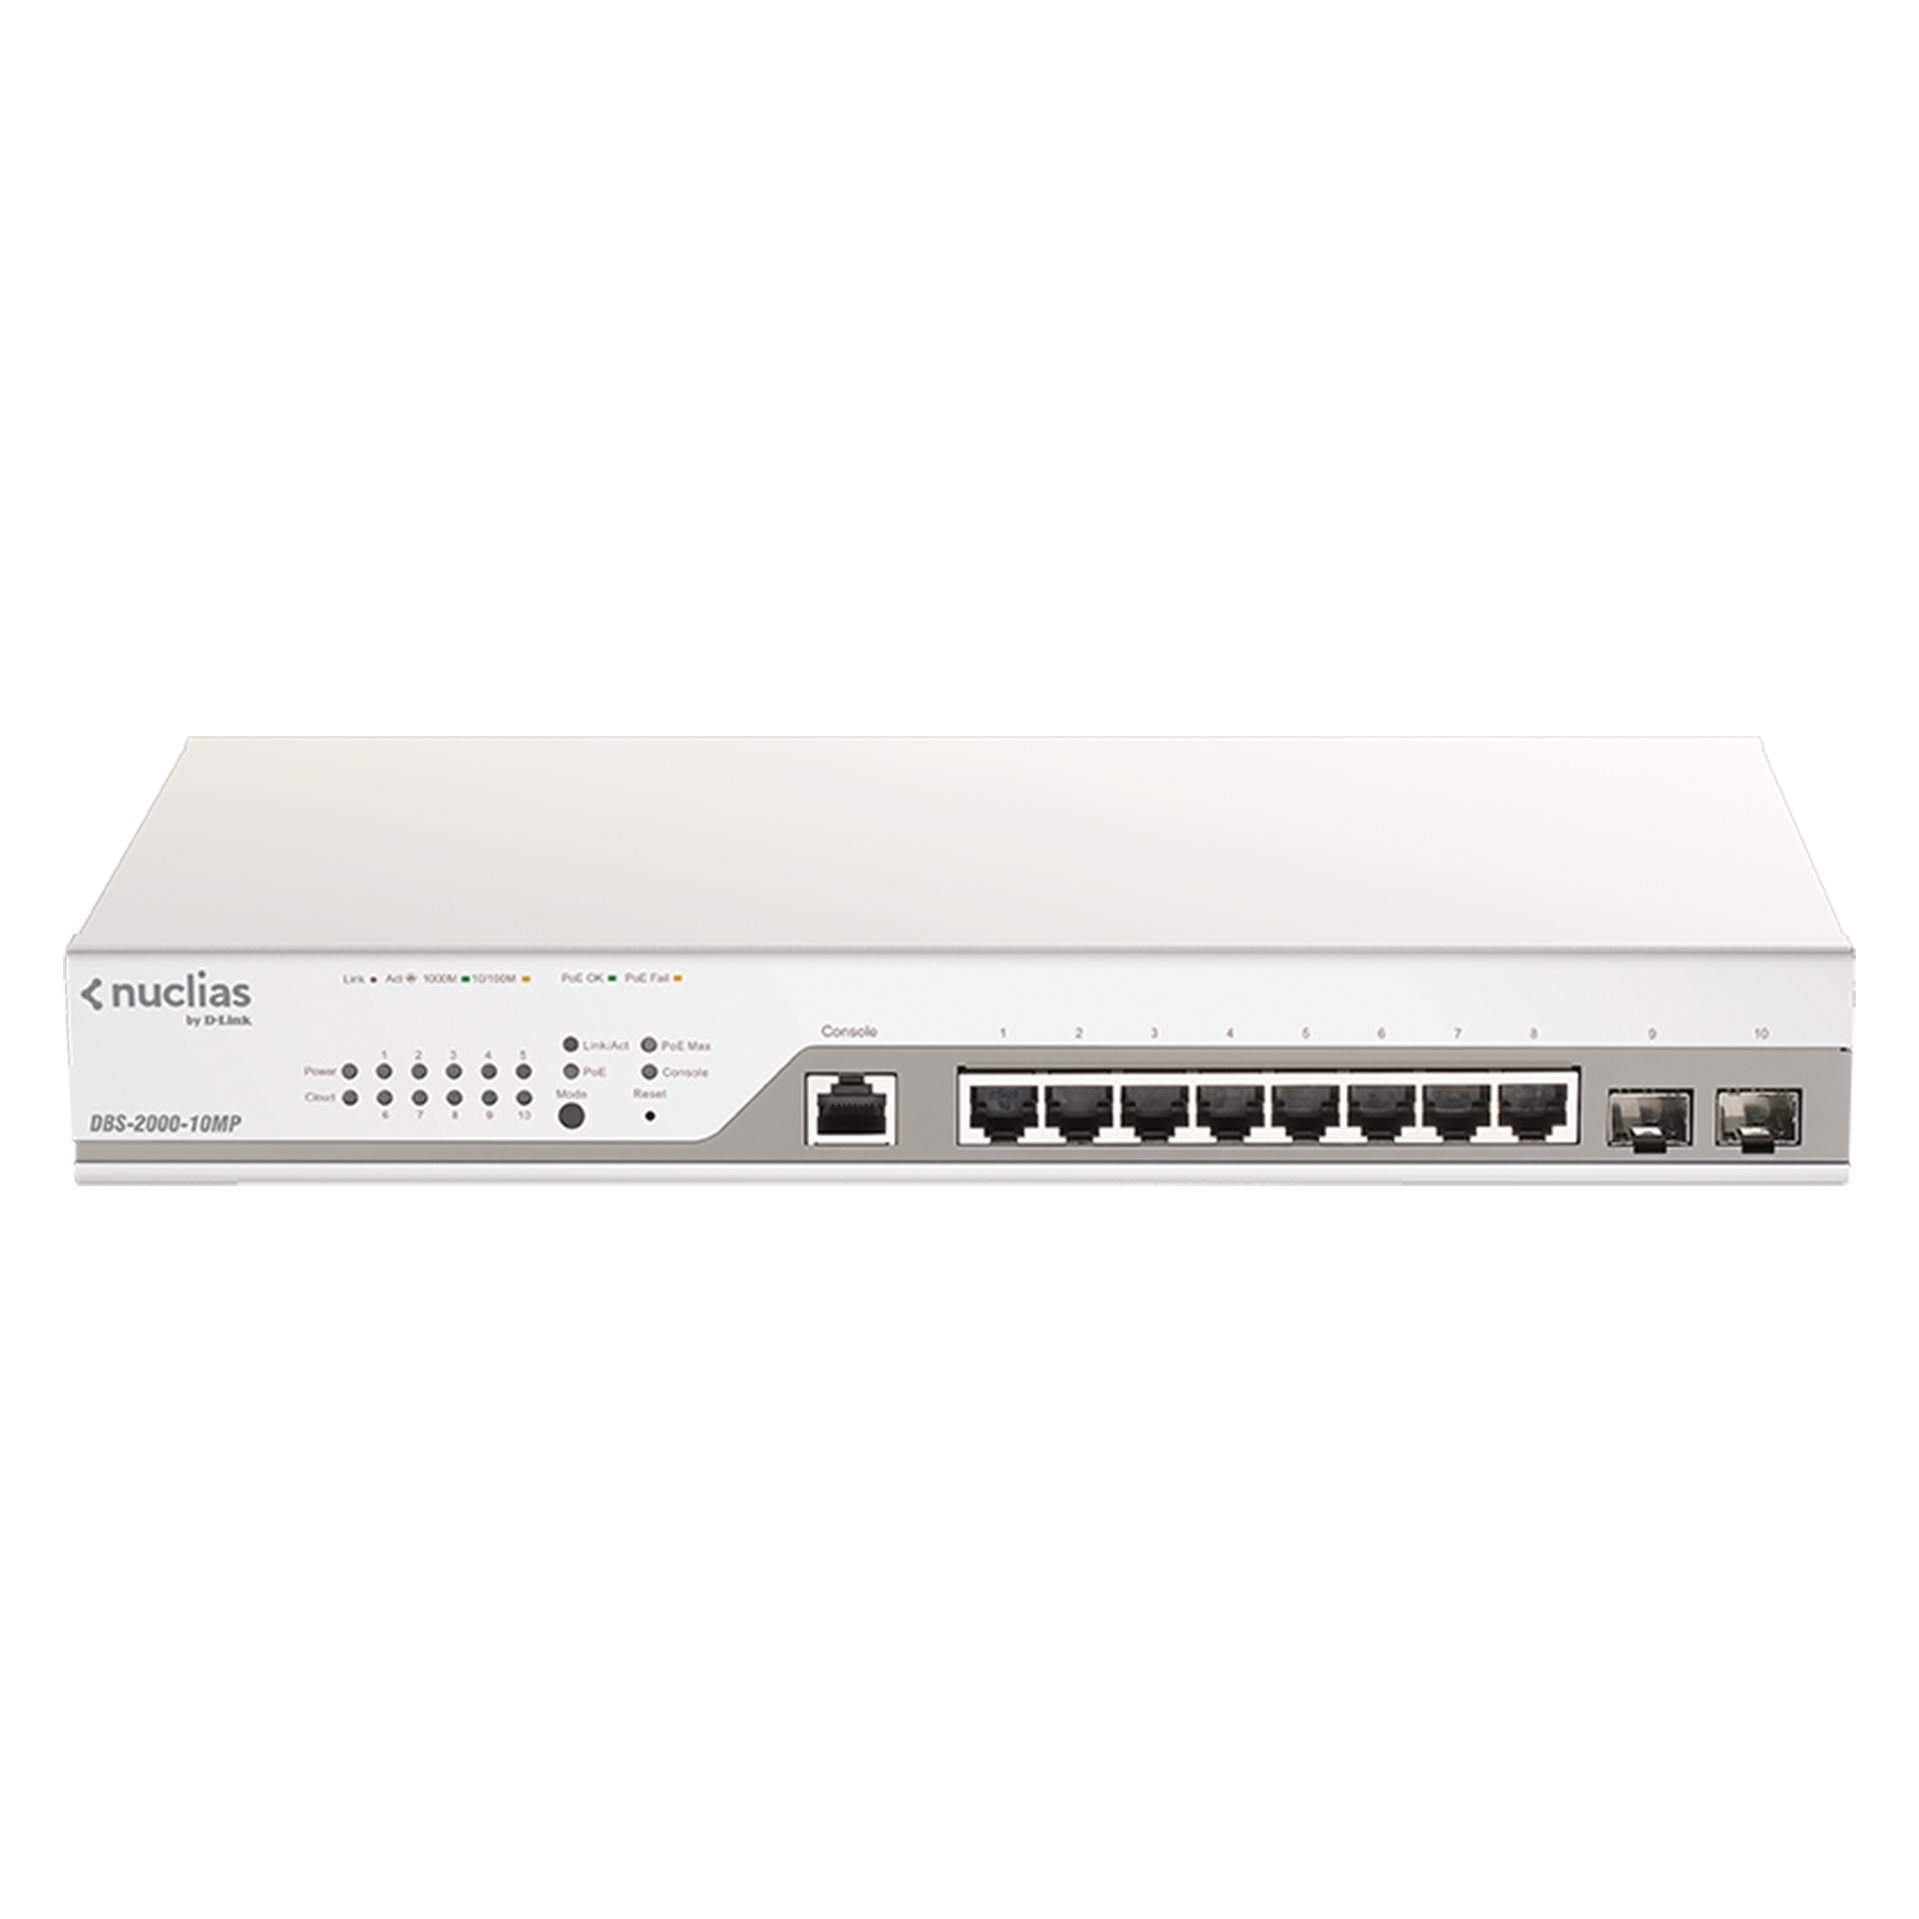   Switch ethernet   Nuclias Switch 8 Ports Giga PoE at 130W + 2 SFP DBS-2000-10MP